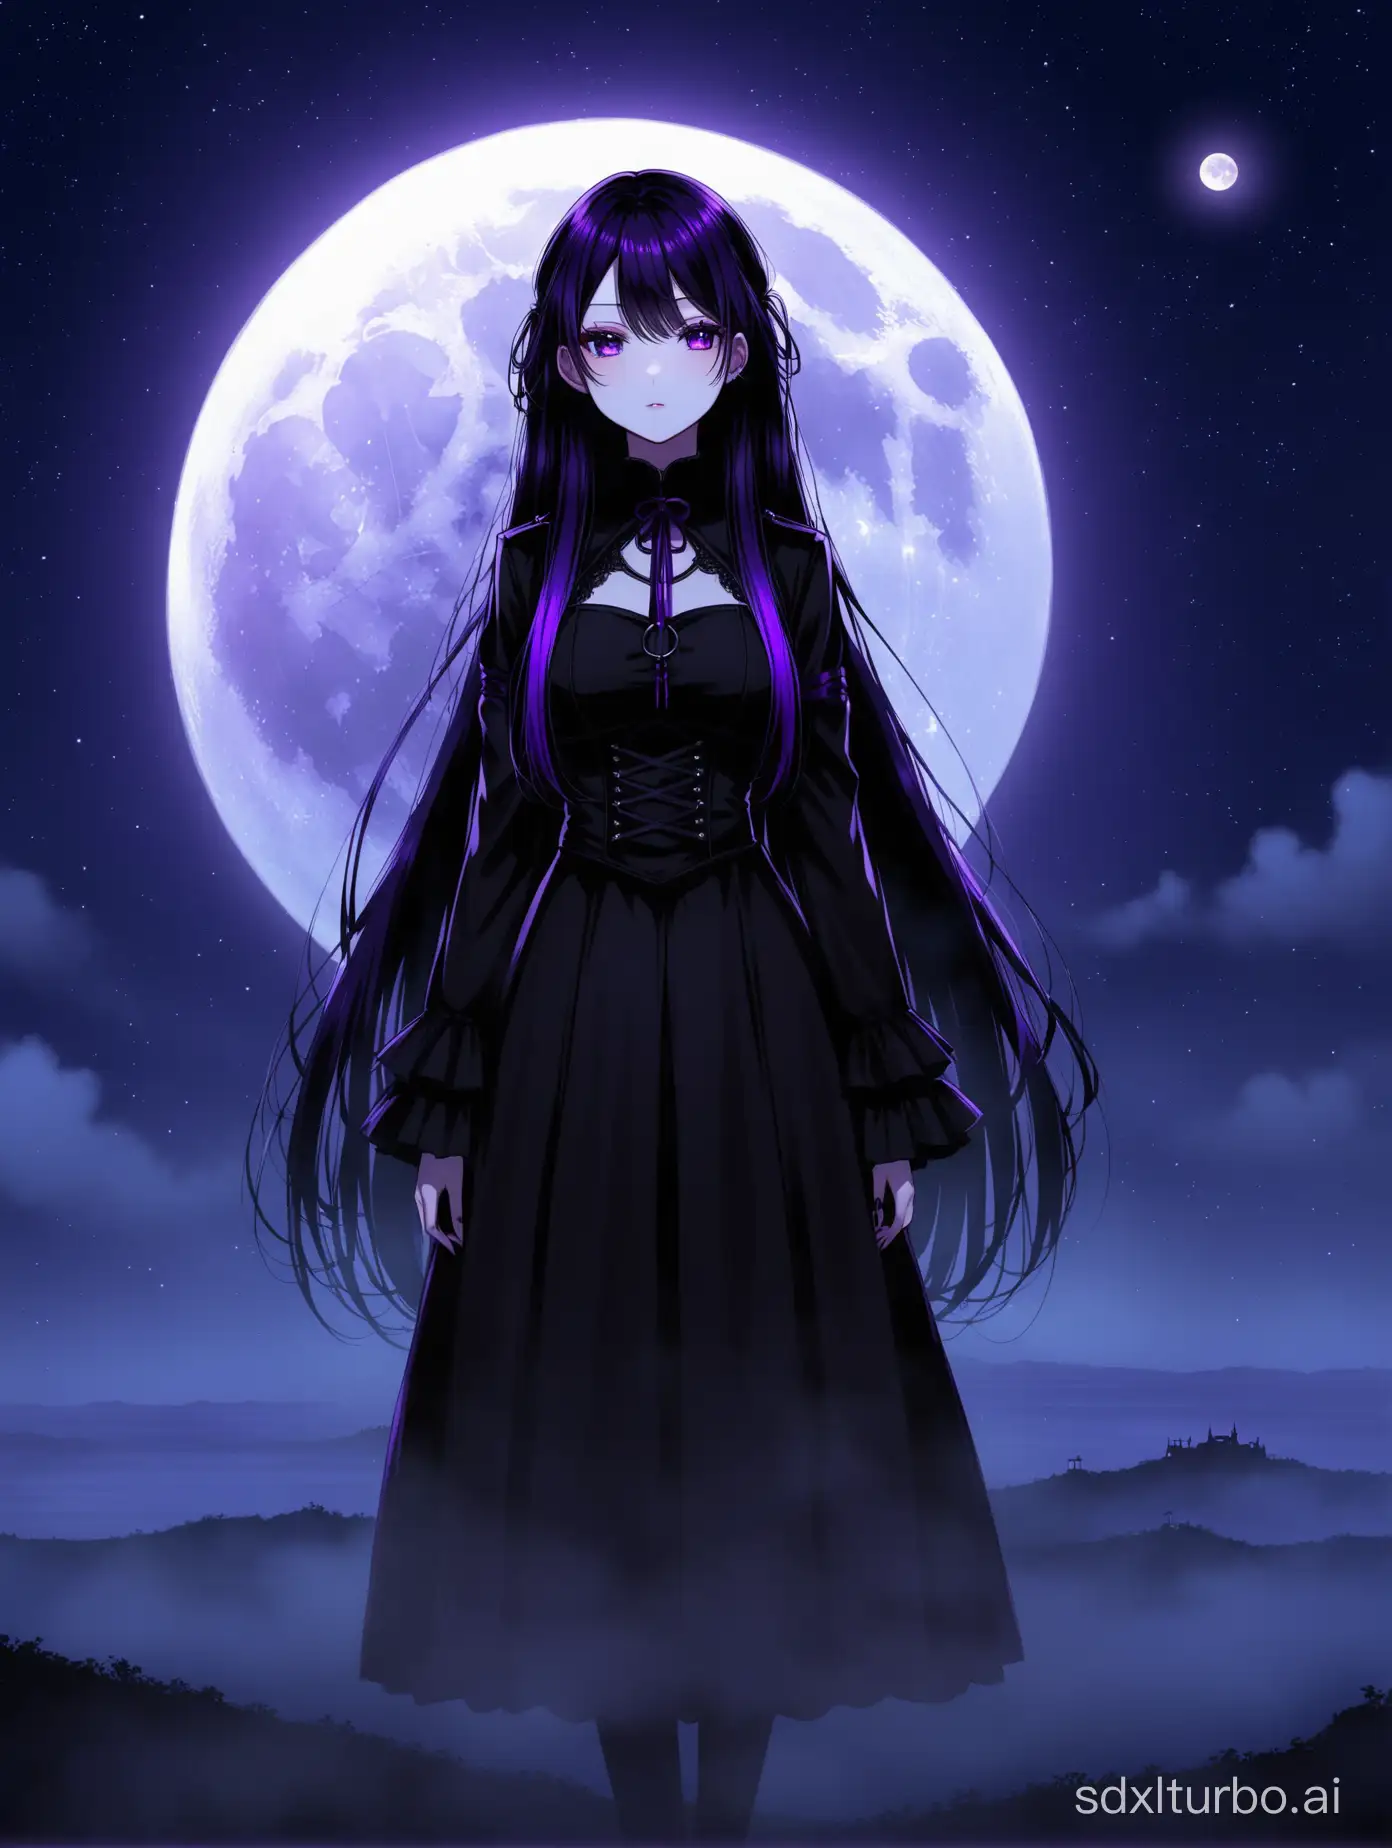 Rei Hino with purple highlights in her long hair, in dark colored Goth clothing, with a lonely narrow moon on the distant horizon with no stars and a foggy background.